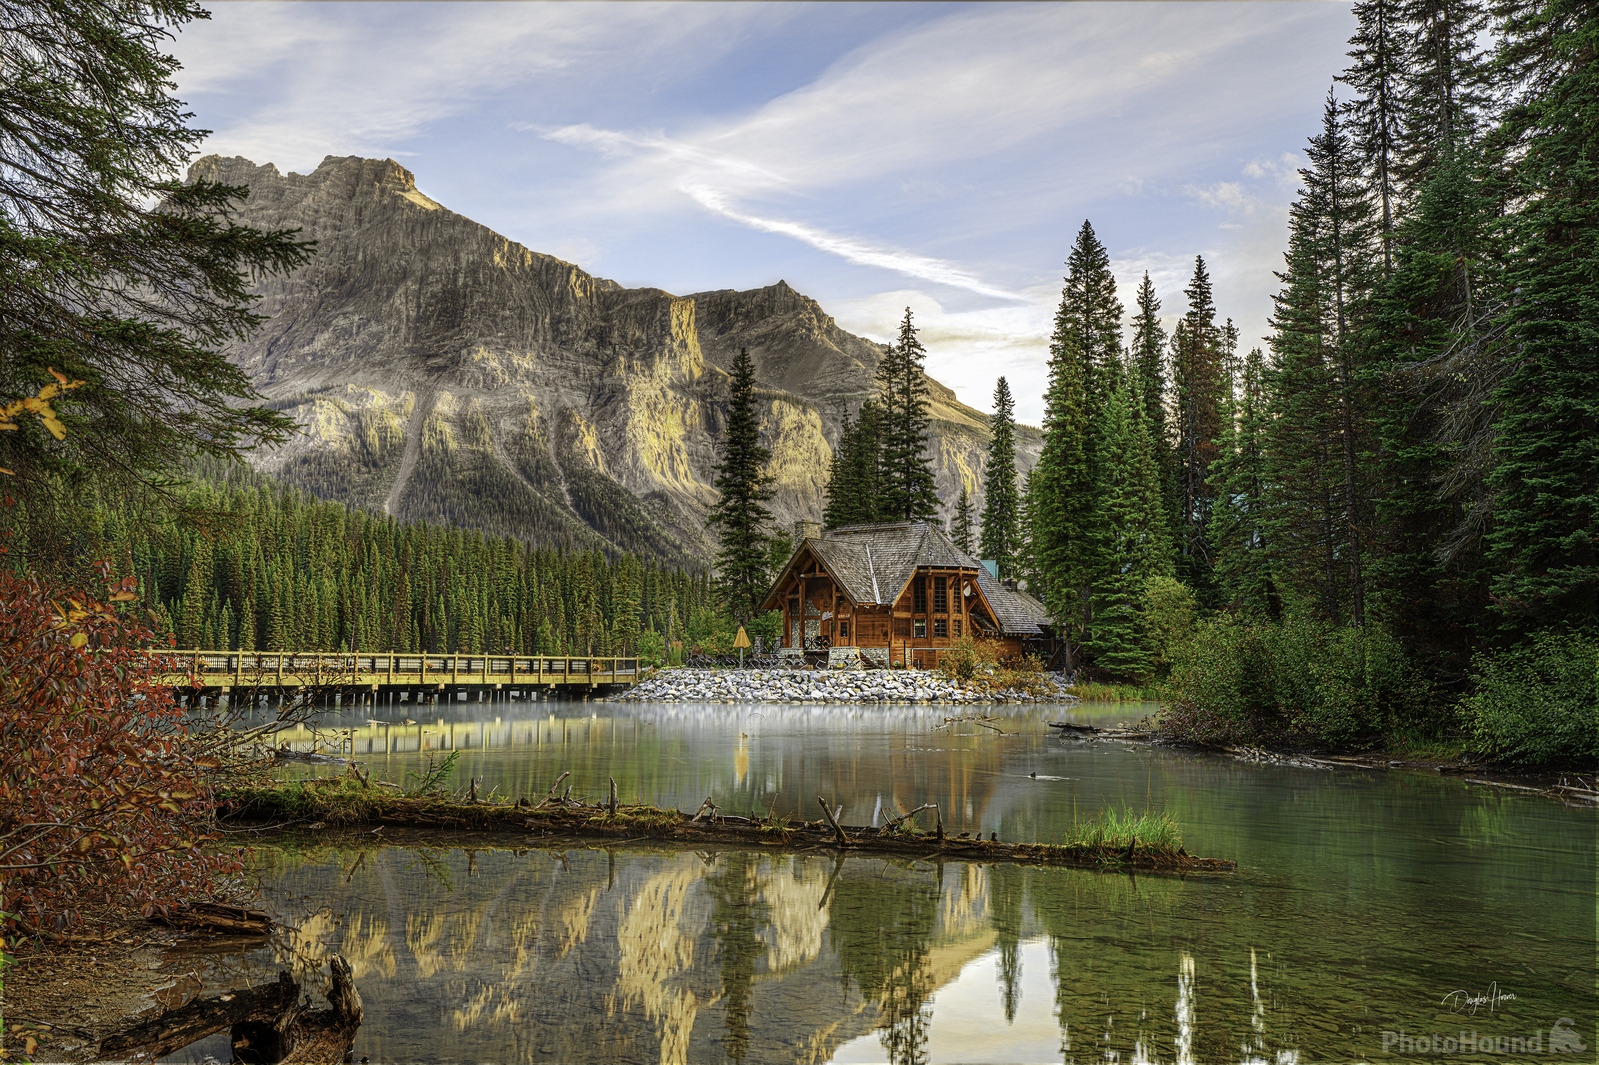 Image of Emerald Lake Lodge View by Doug Hoover